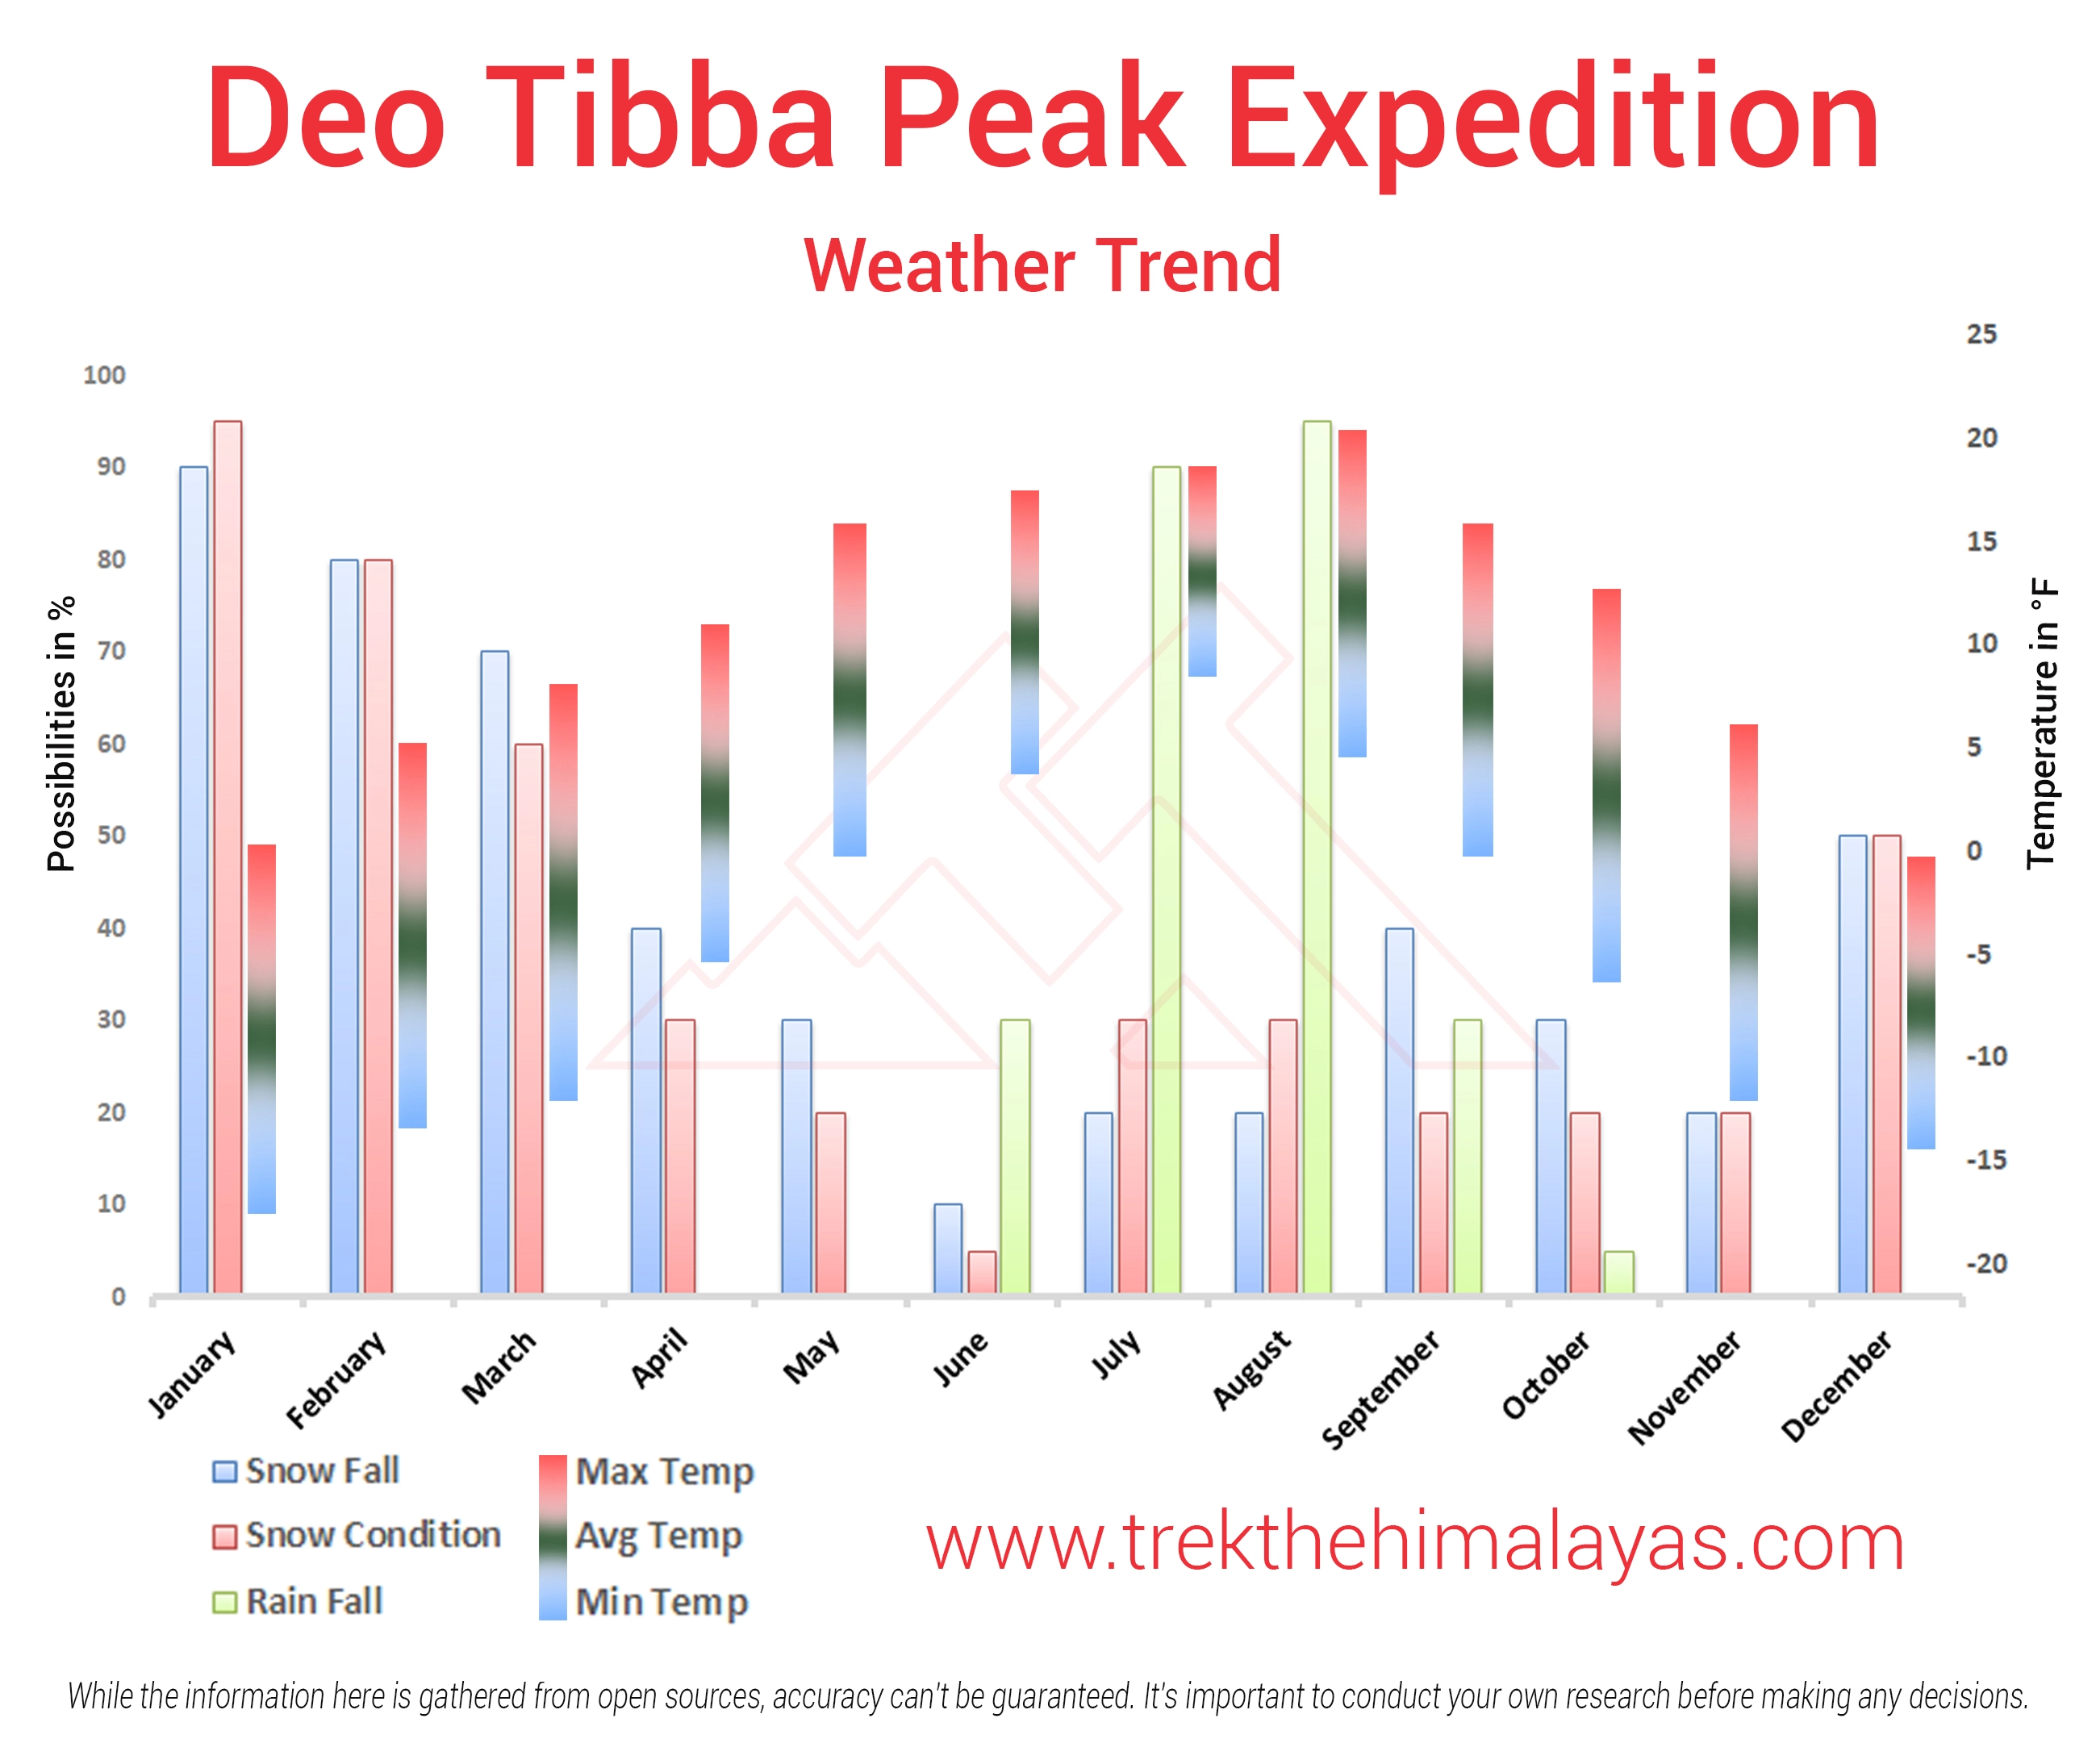 Deo Tibba Peak Expedition Maps